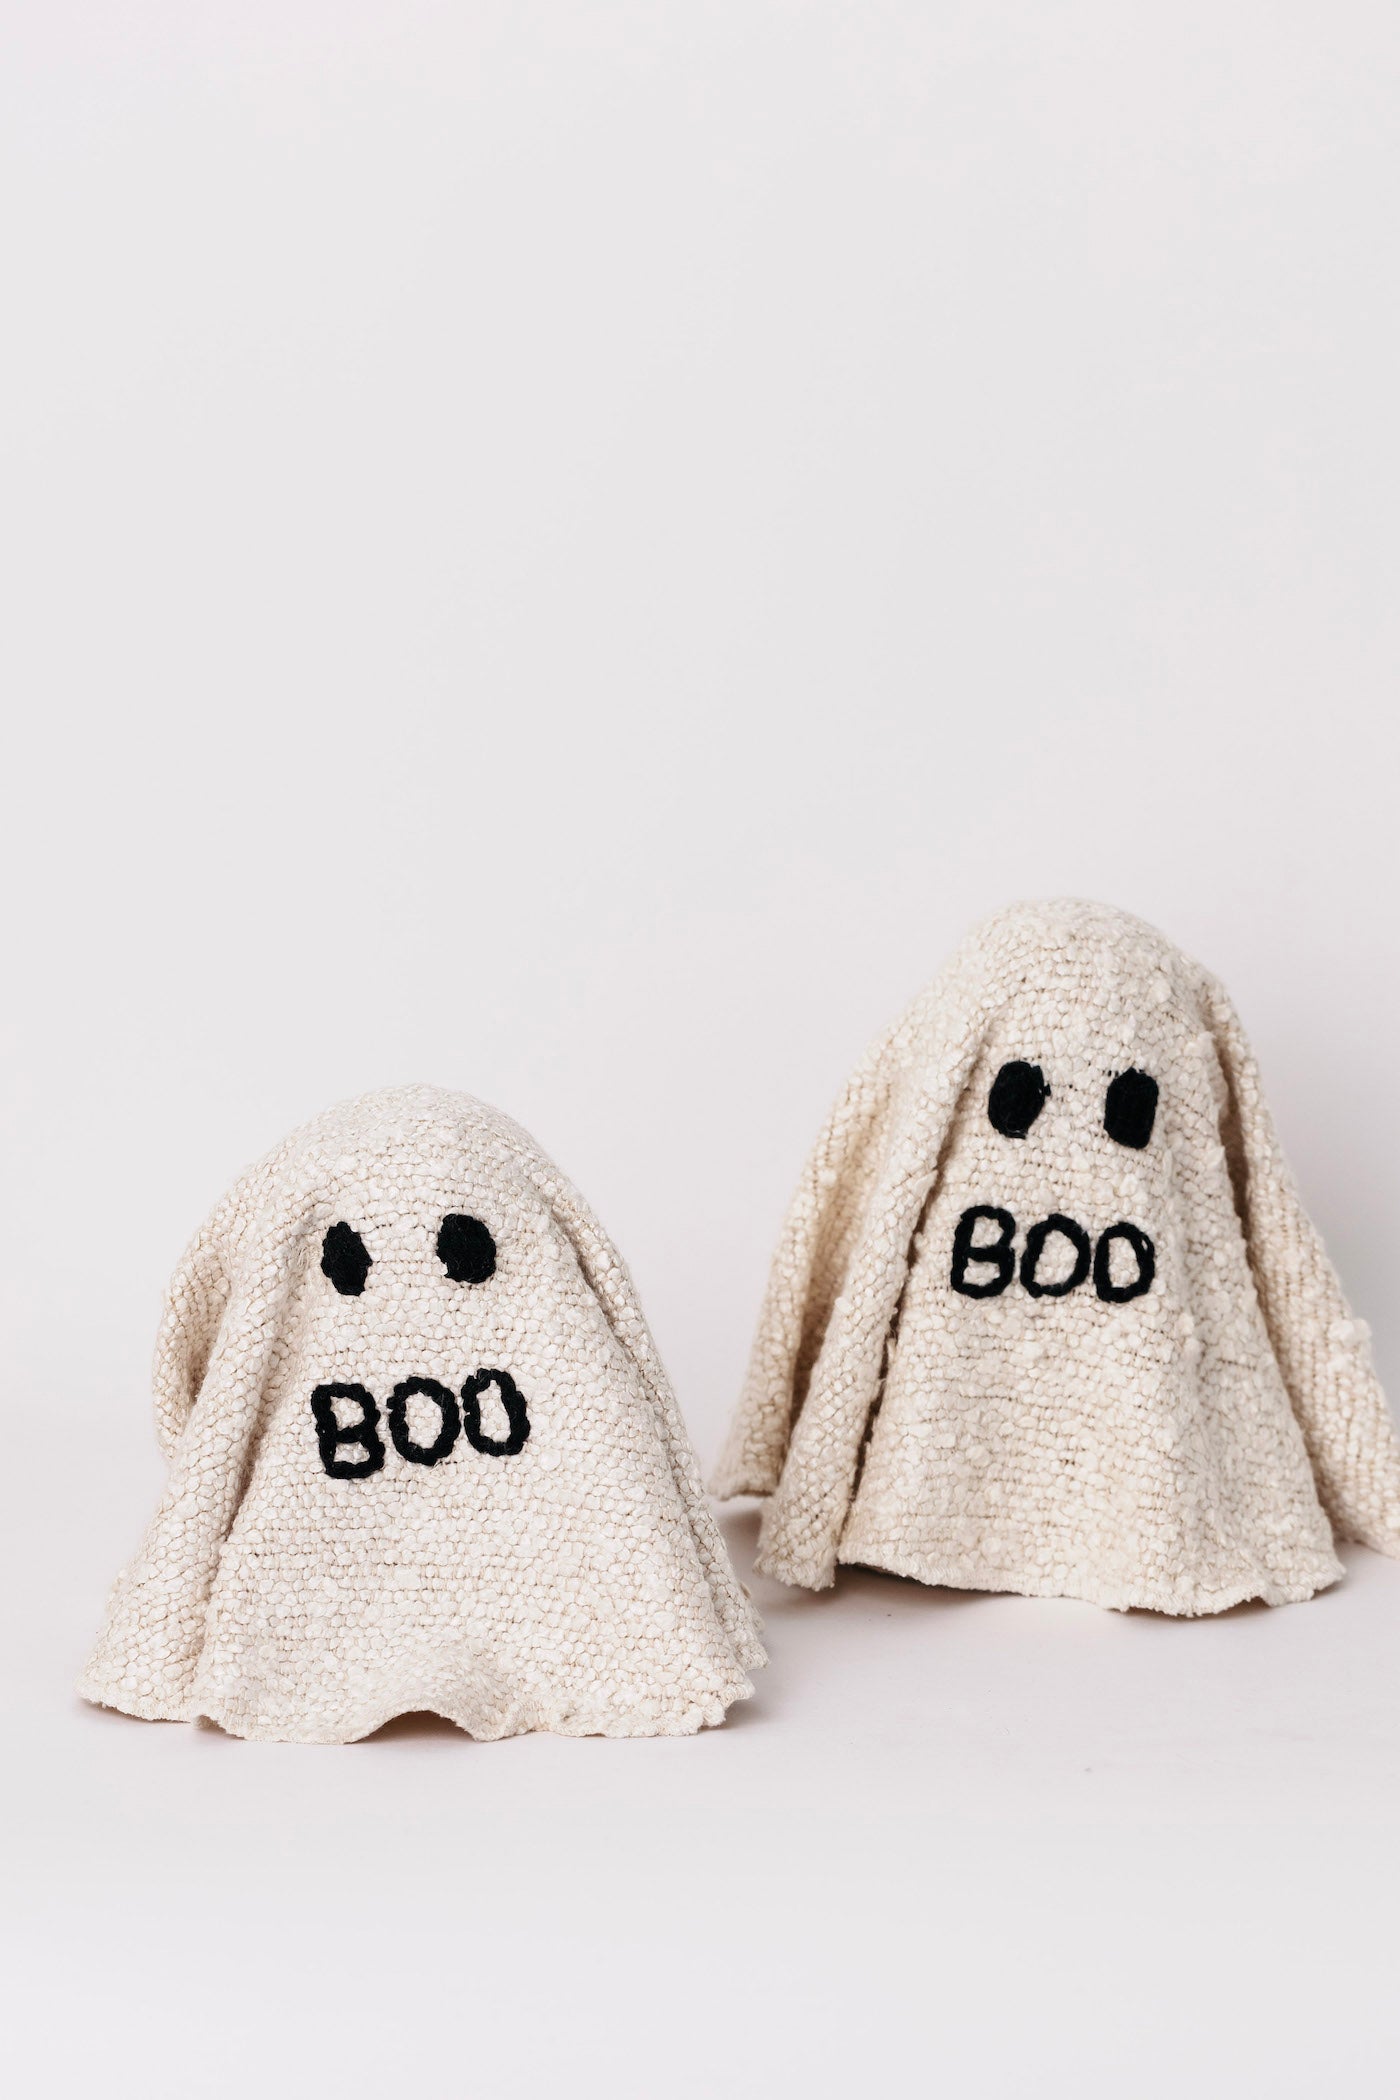 Casper Hand-Crafted Ghosts - Set of 2